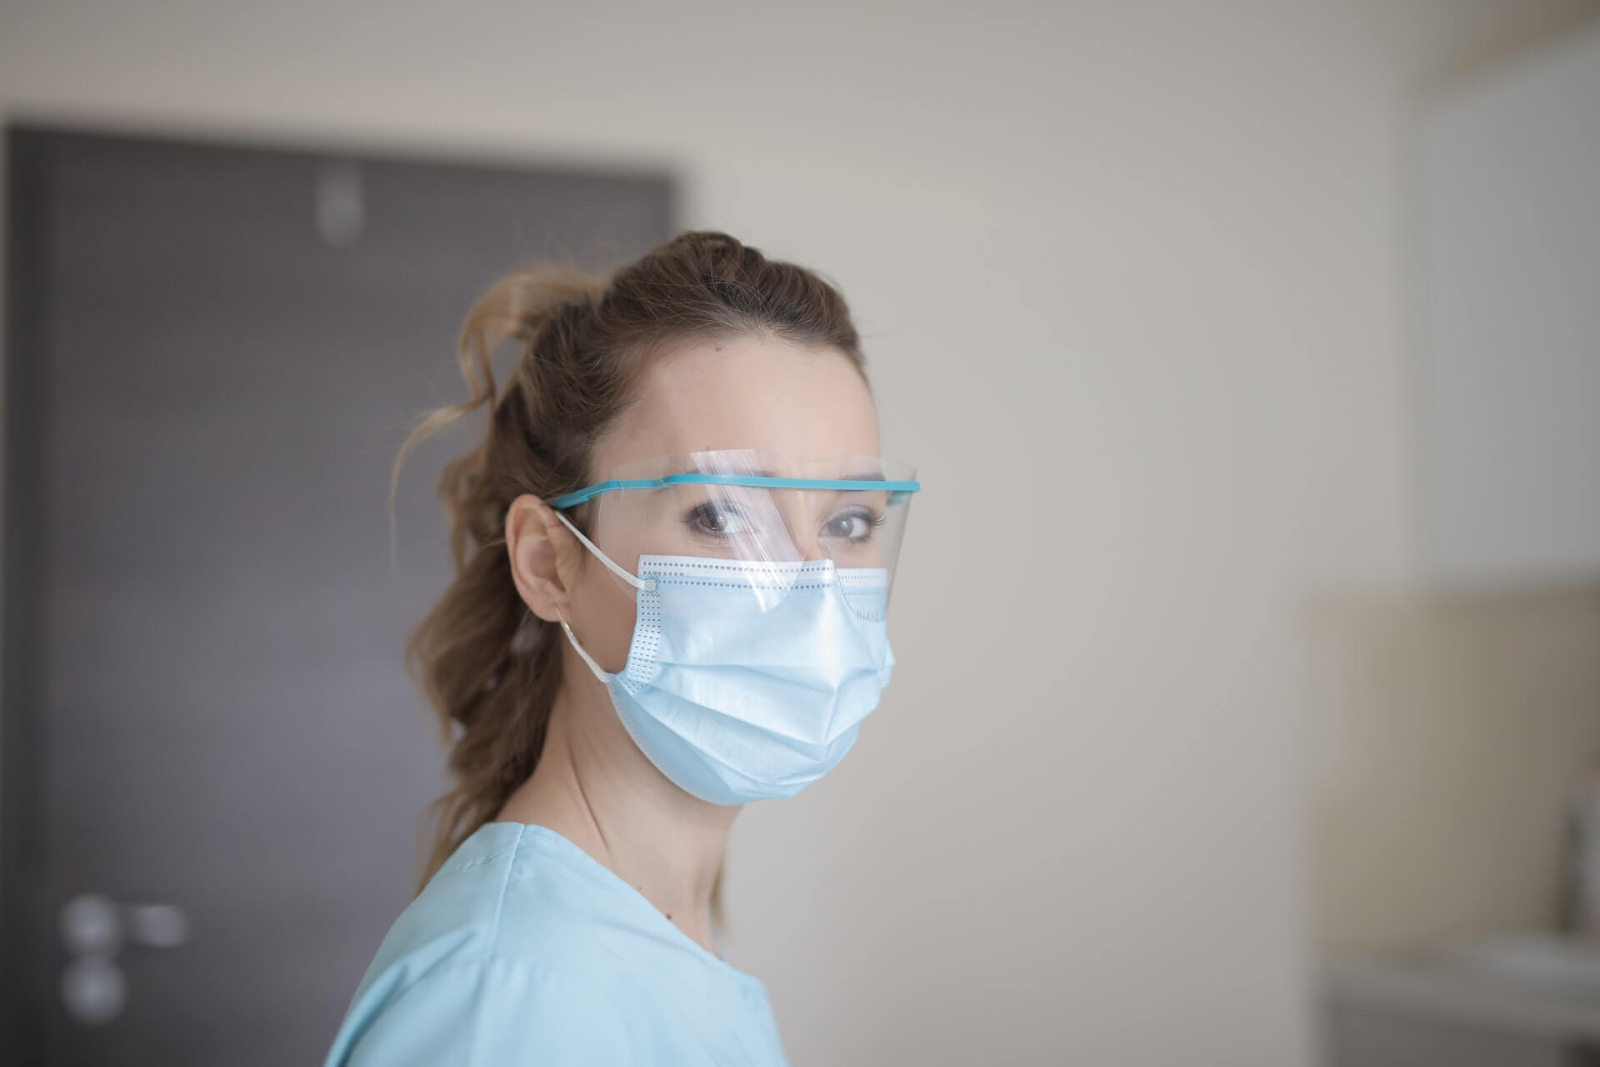 a person wearing scrubs, a face shield, and a mask
